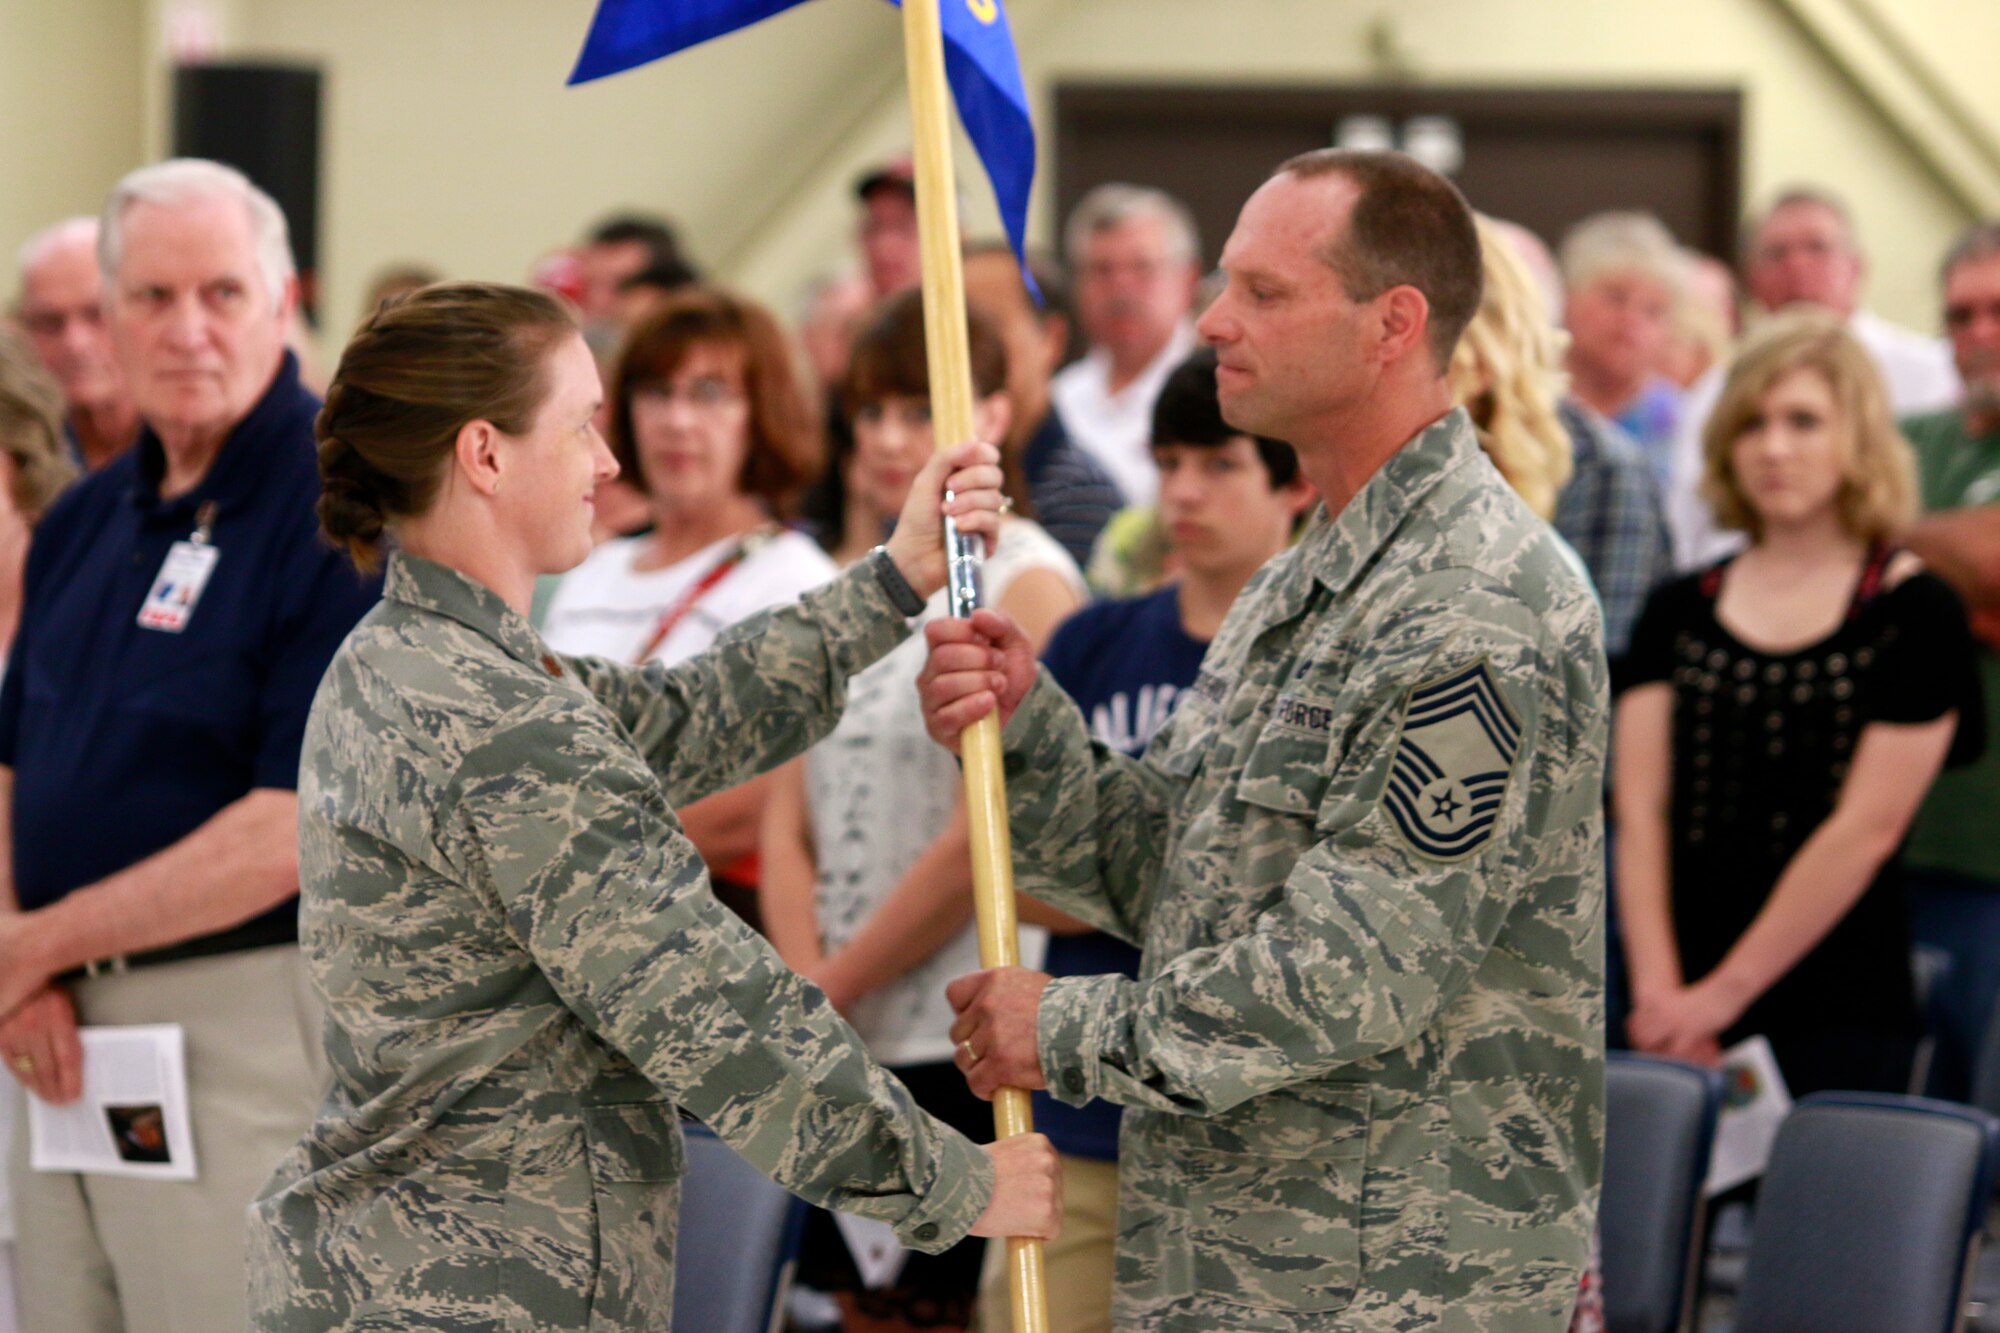 Maj. Sara Stigler hands her squadron guidon to Chief Master Sgt. Donnie Frederick following her assumption of command of the newly activated 153rd Intelligence Squadron during a Conversion Day ceremony held at Ebbing Air National Guard Base, Fort Smith, Arkansas, June 7, 2014.  The ceremony also recognized the many changes occurring at the wing as a result of its conversion to a remotely piloted aircraft (MQ-9 Reapers) and ISR mission. The 188th Fighter Wing was redesignated as the 188th Wing during the event as well. (U.S. Air National Guard photo by Staff Sgt. Matt Pelkey)